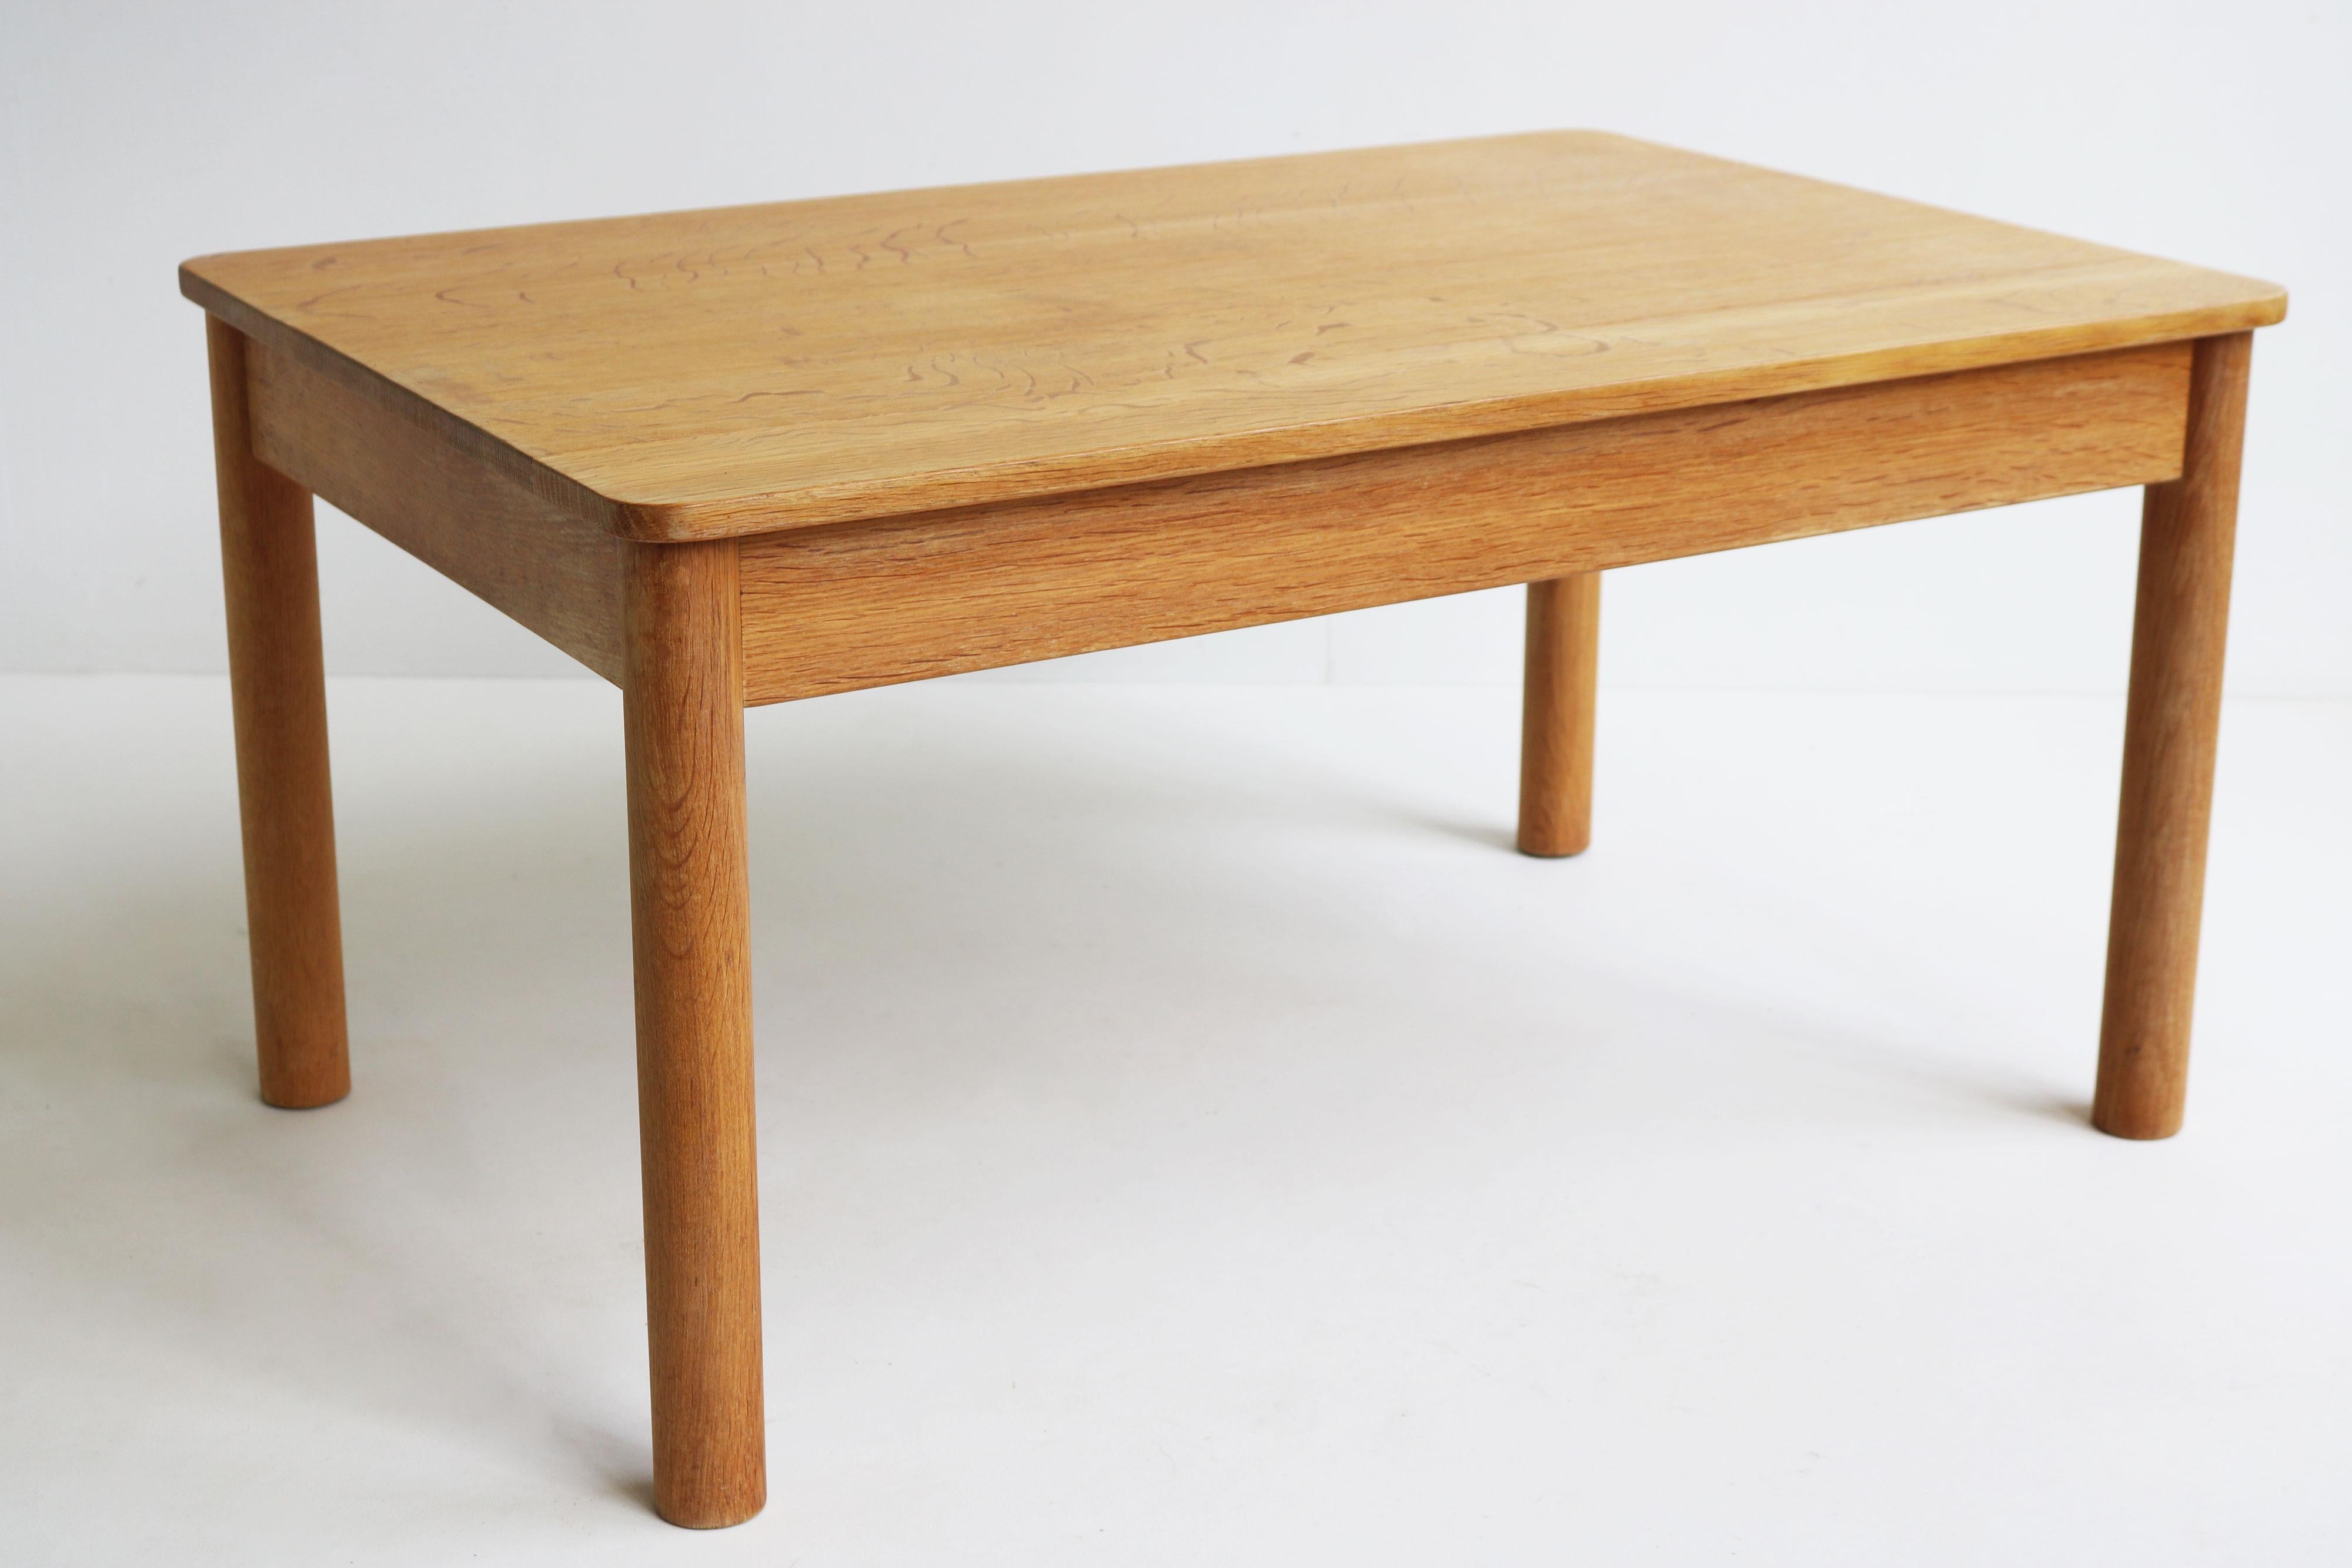 Danish Solid oak coffee table Model: 5350 by Borge Mogensen 1950 Shaker syle side table For Sale